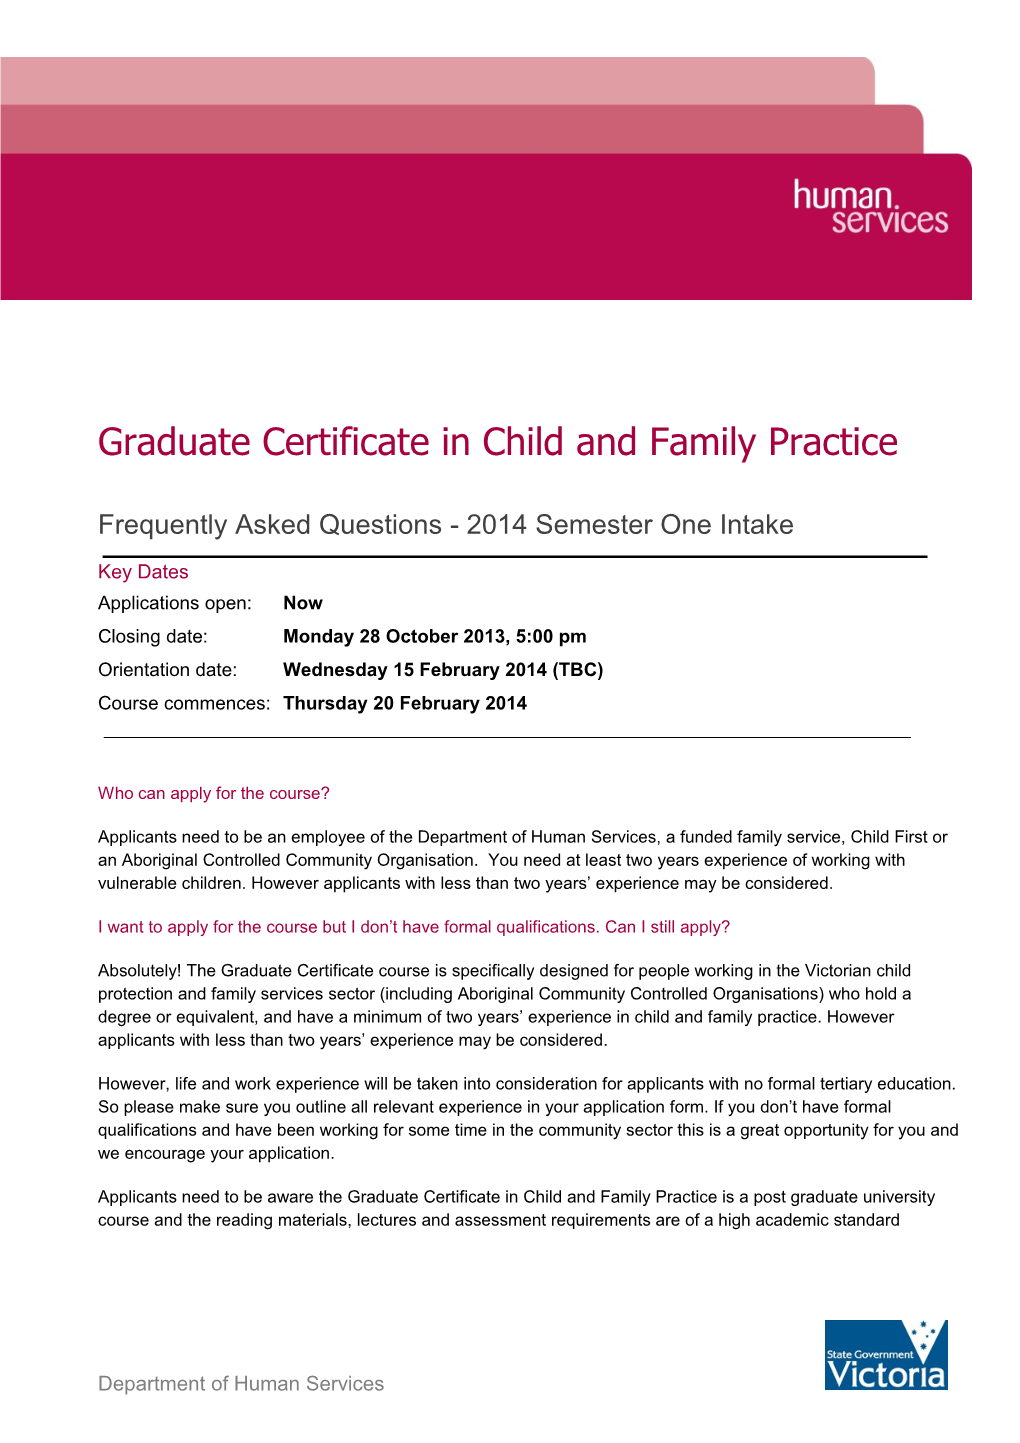 Graduate Certificate In Child And Family Practice